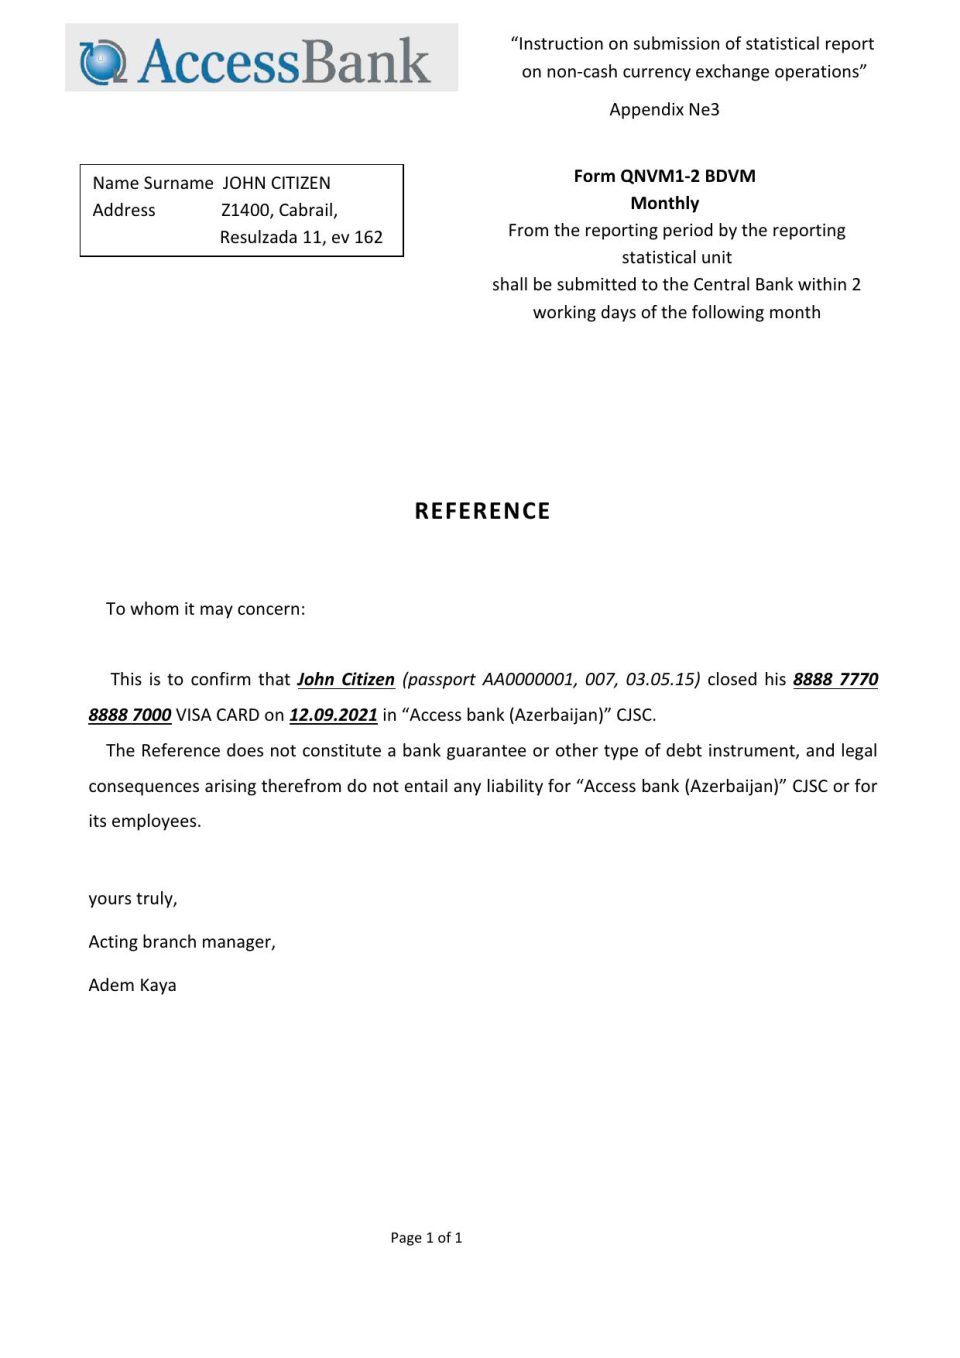 Download Azerbaijan Access Bank Reference Letter Templates | Editable Word